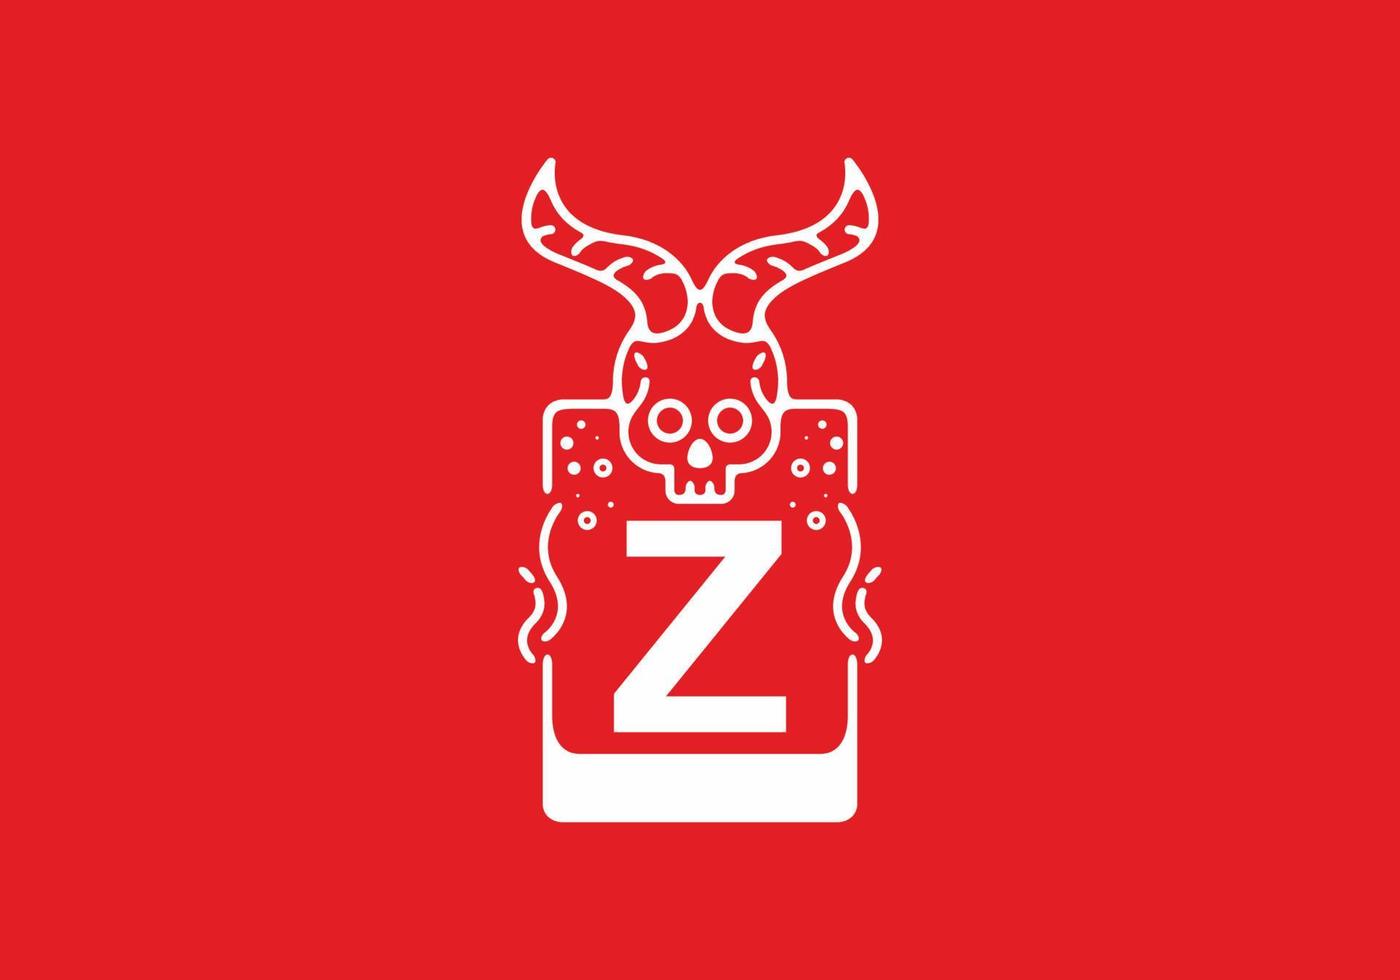 White red line art illustration of skull with Z initial letter in the middle vector